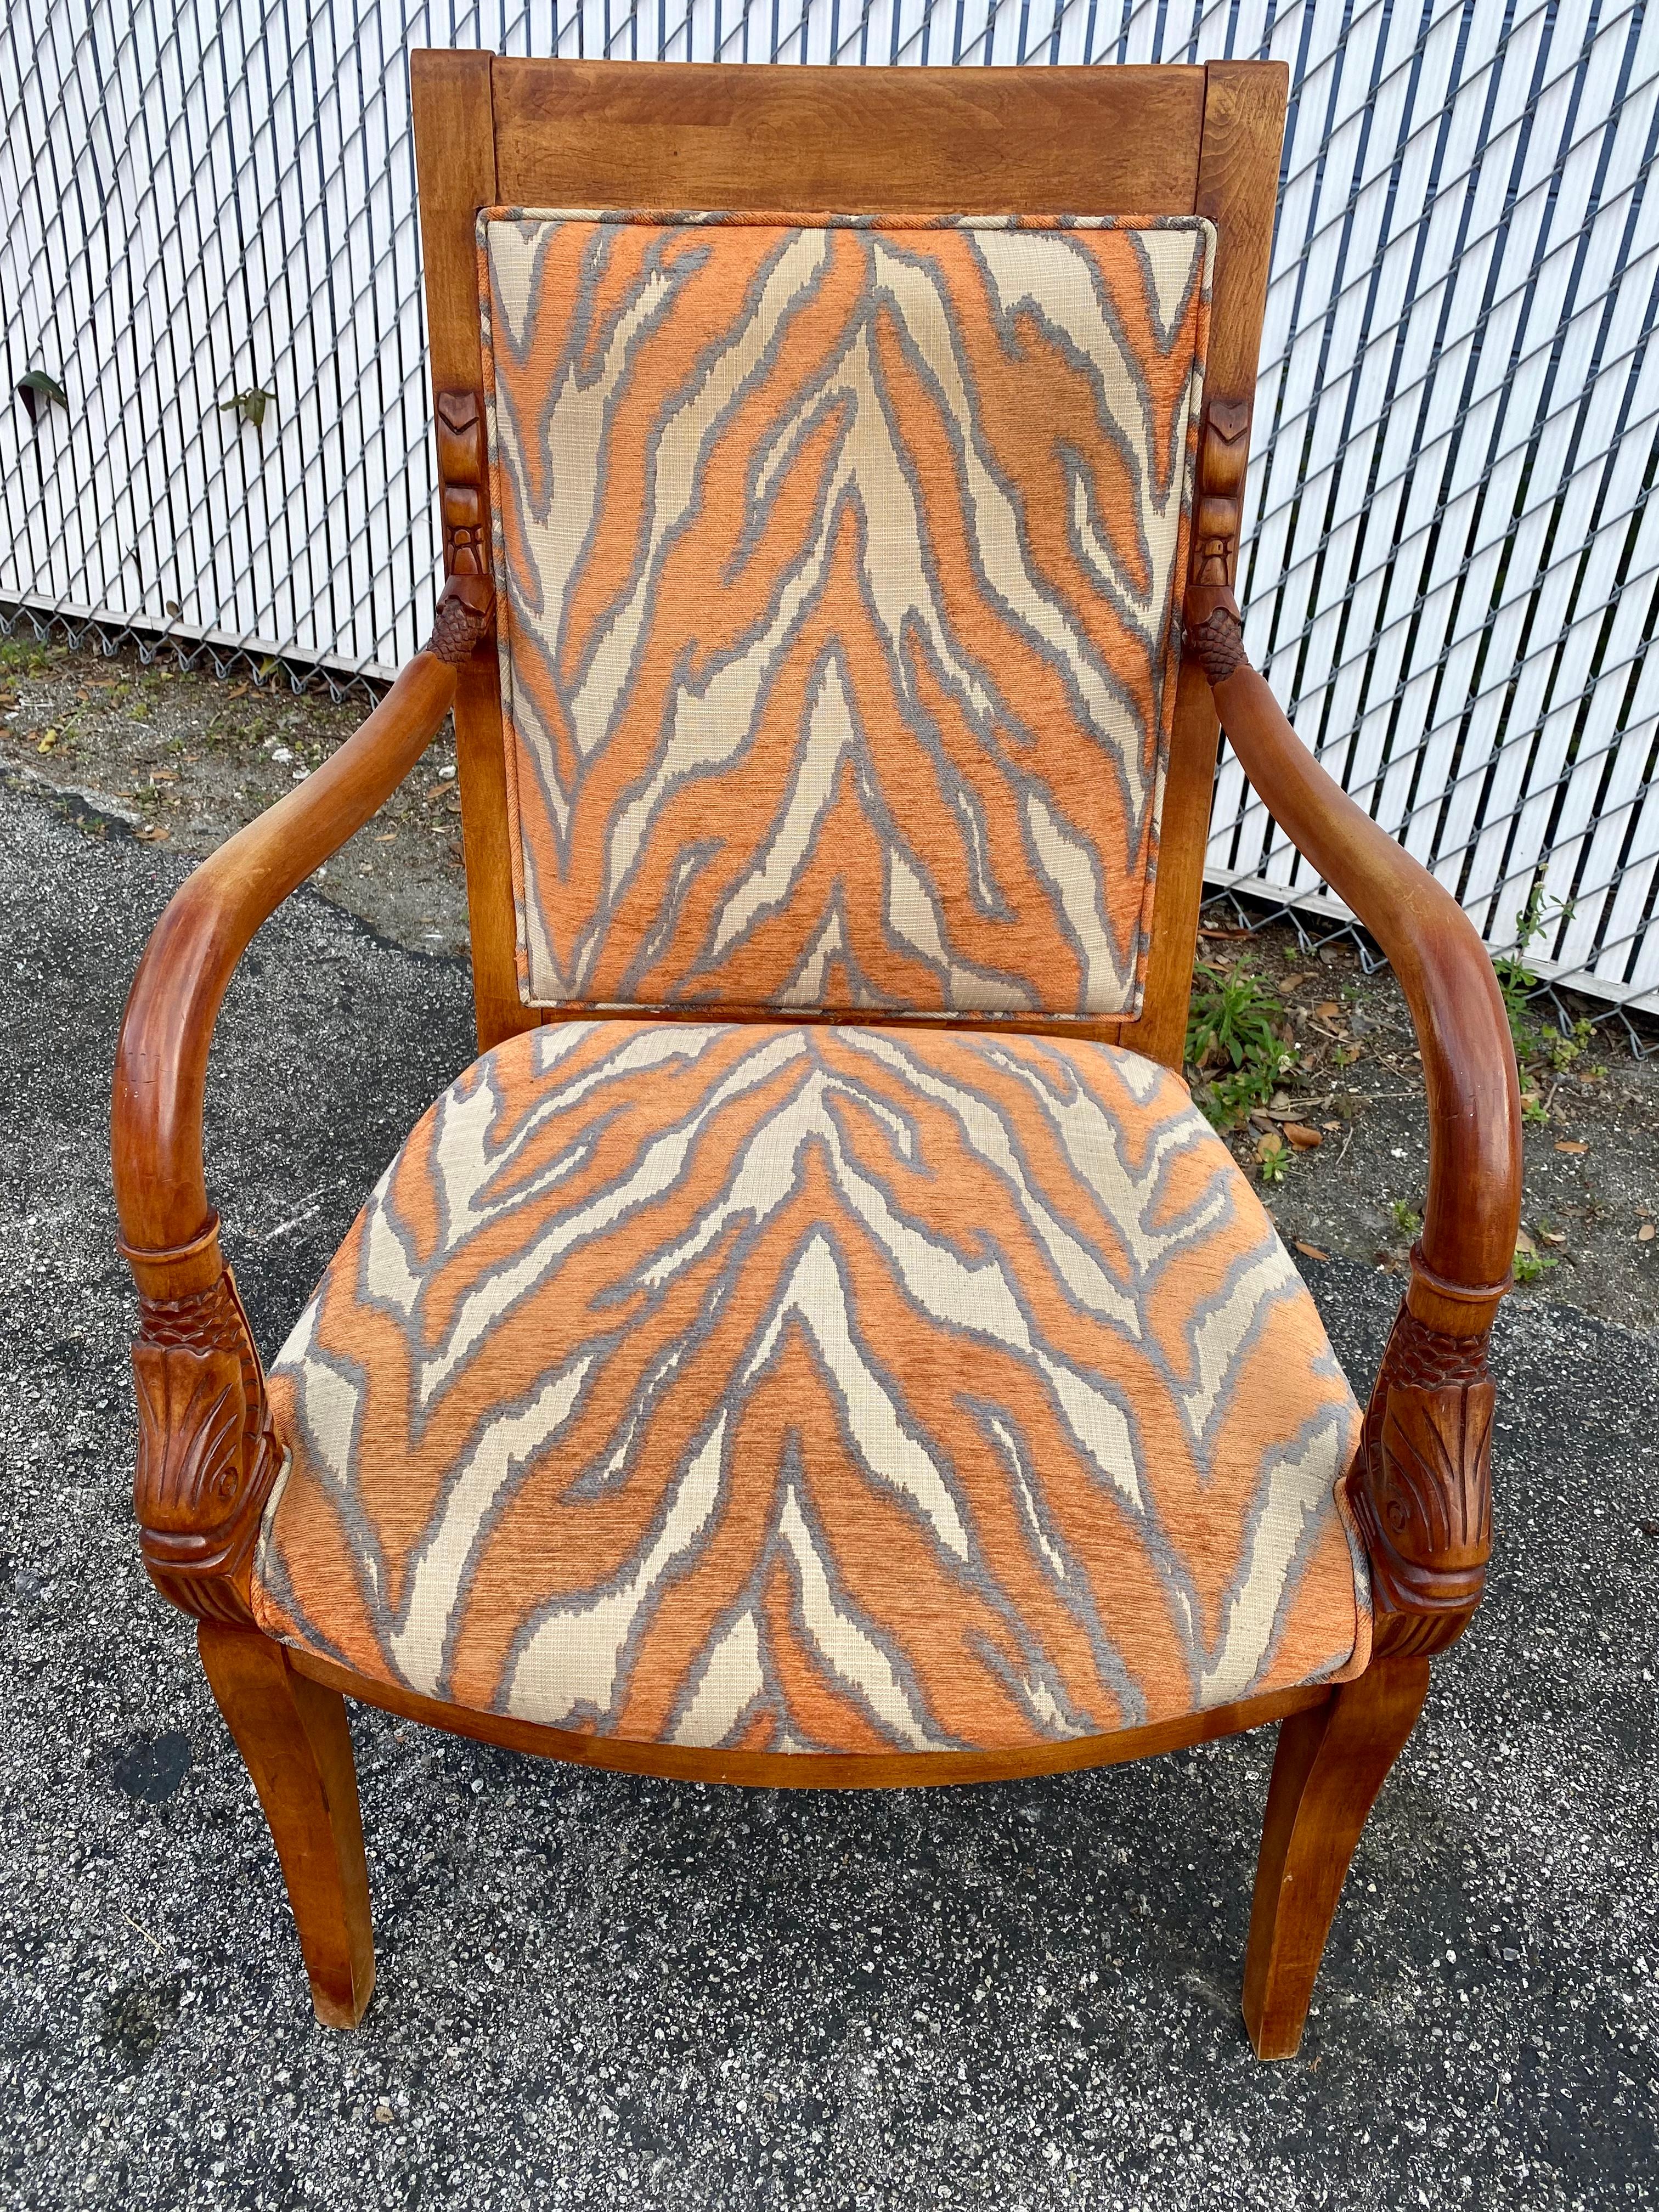 1970s Carved Wood Gold Fish Zebra Bentwood Chairs and Ottoman, Set of 3 For Sale 5